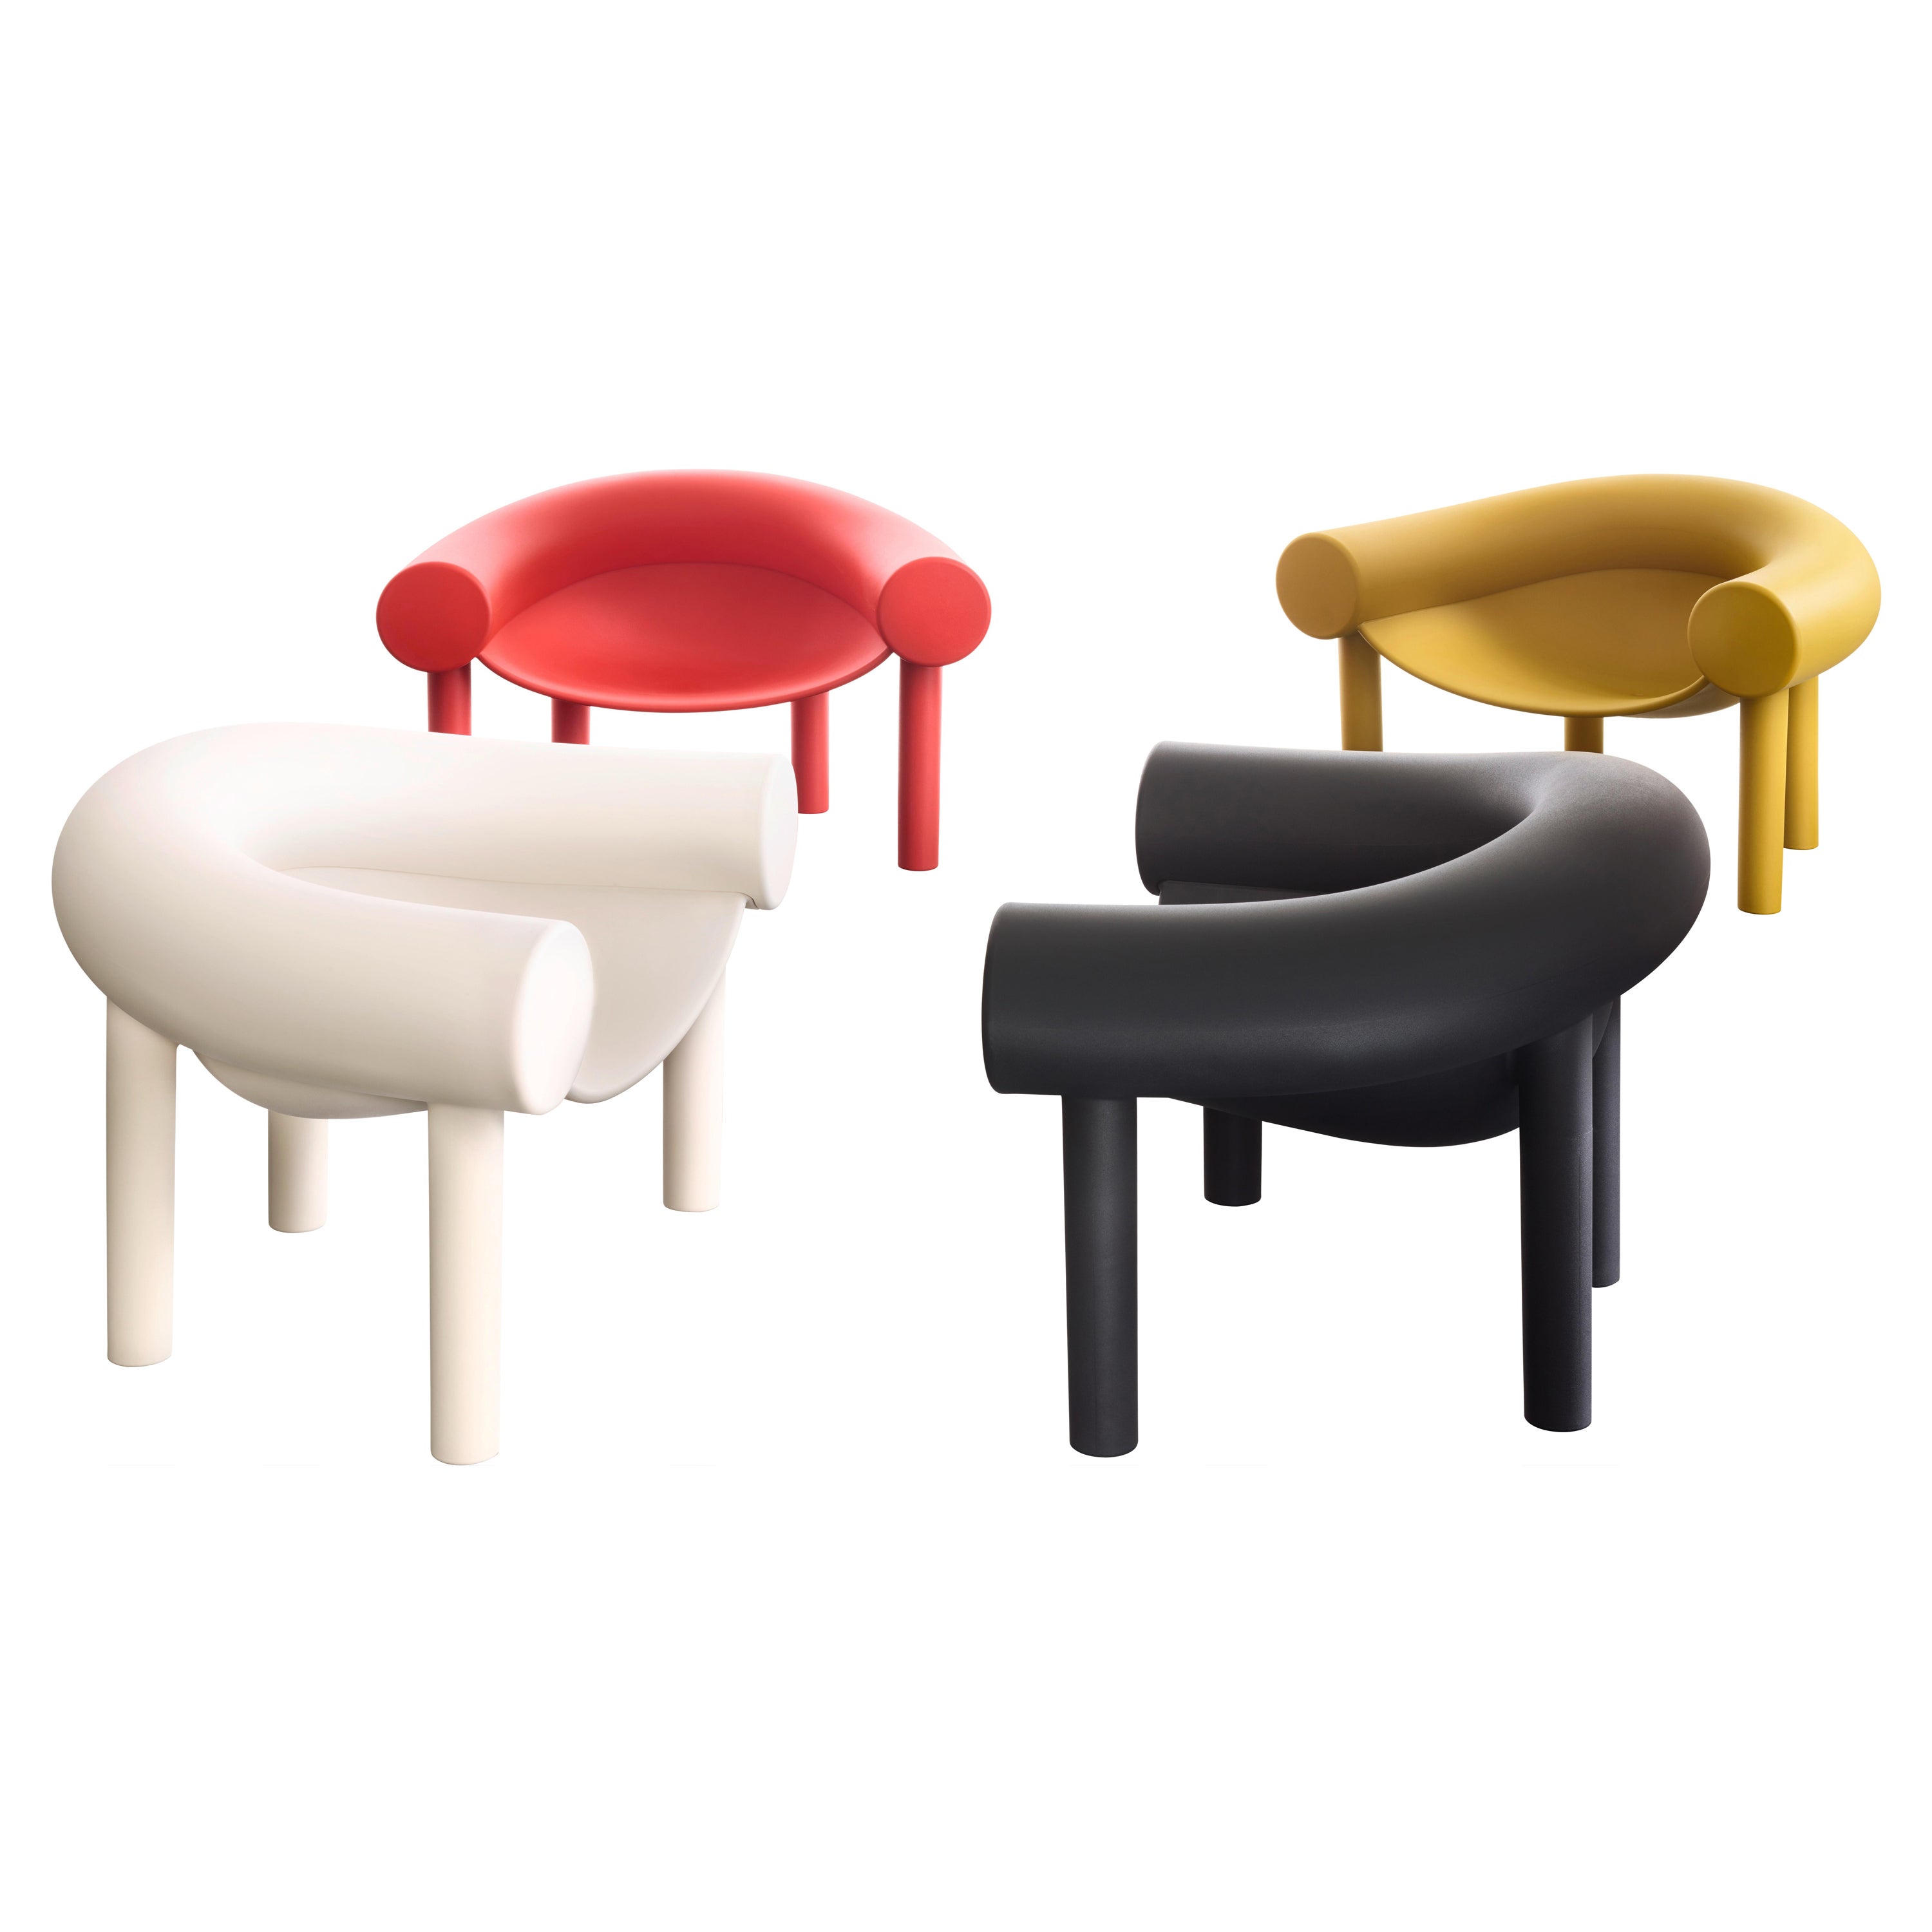 Sam Son is an easy armchair with a hint of a cartoon character. Supported on four stilt legs, the armchair features a softly suspended seat shell between a giant, horseshoe-shaped element, the chair’s characteristic armrest and backrest.
Made from